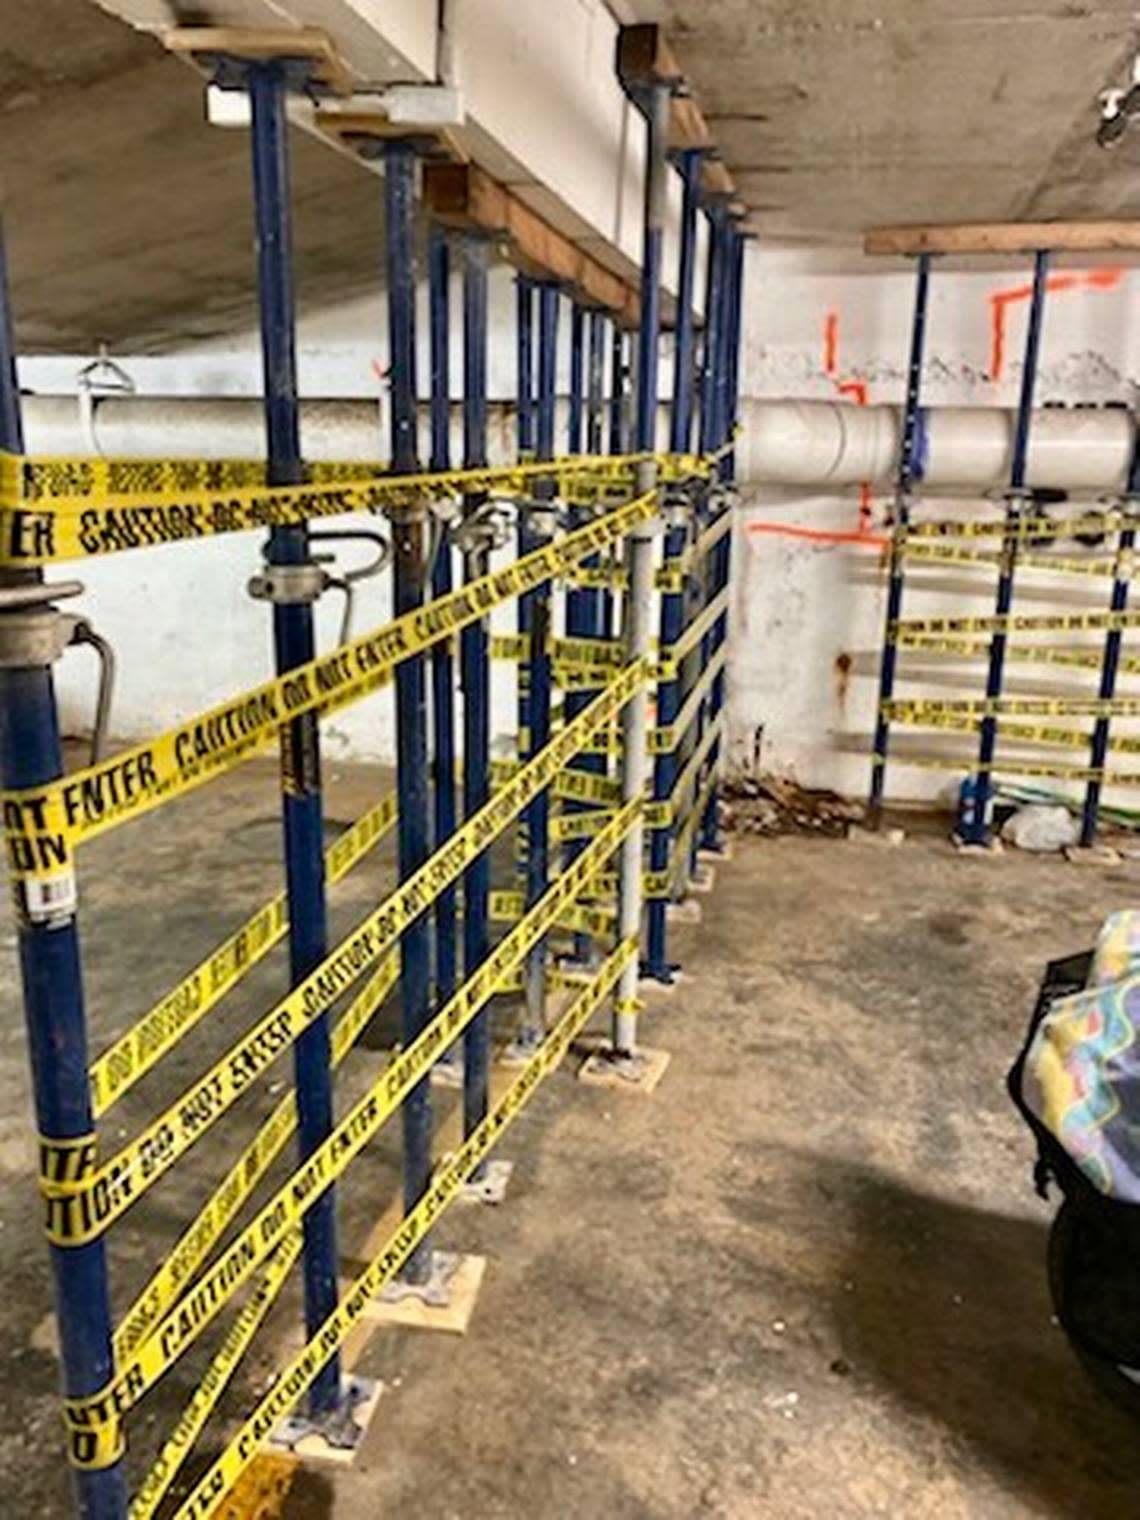 Port Royale condo owner Marash Markaj took this photo of the shoring that was done July 14, 2021, to support an area that needed concrete repairs in the building’s basement garage.